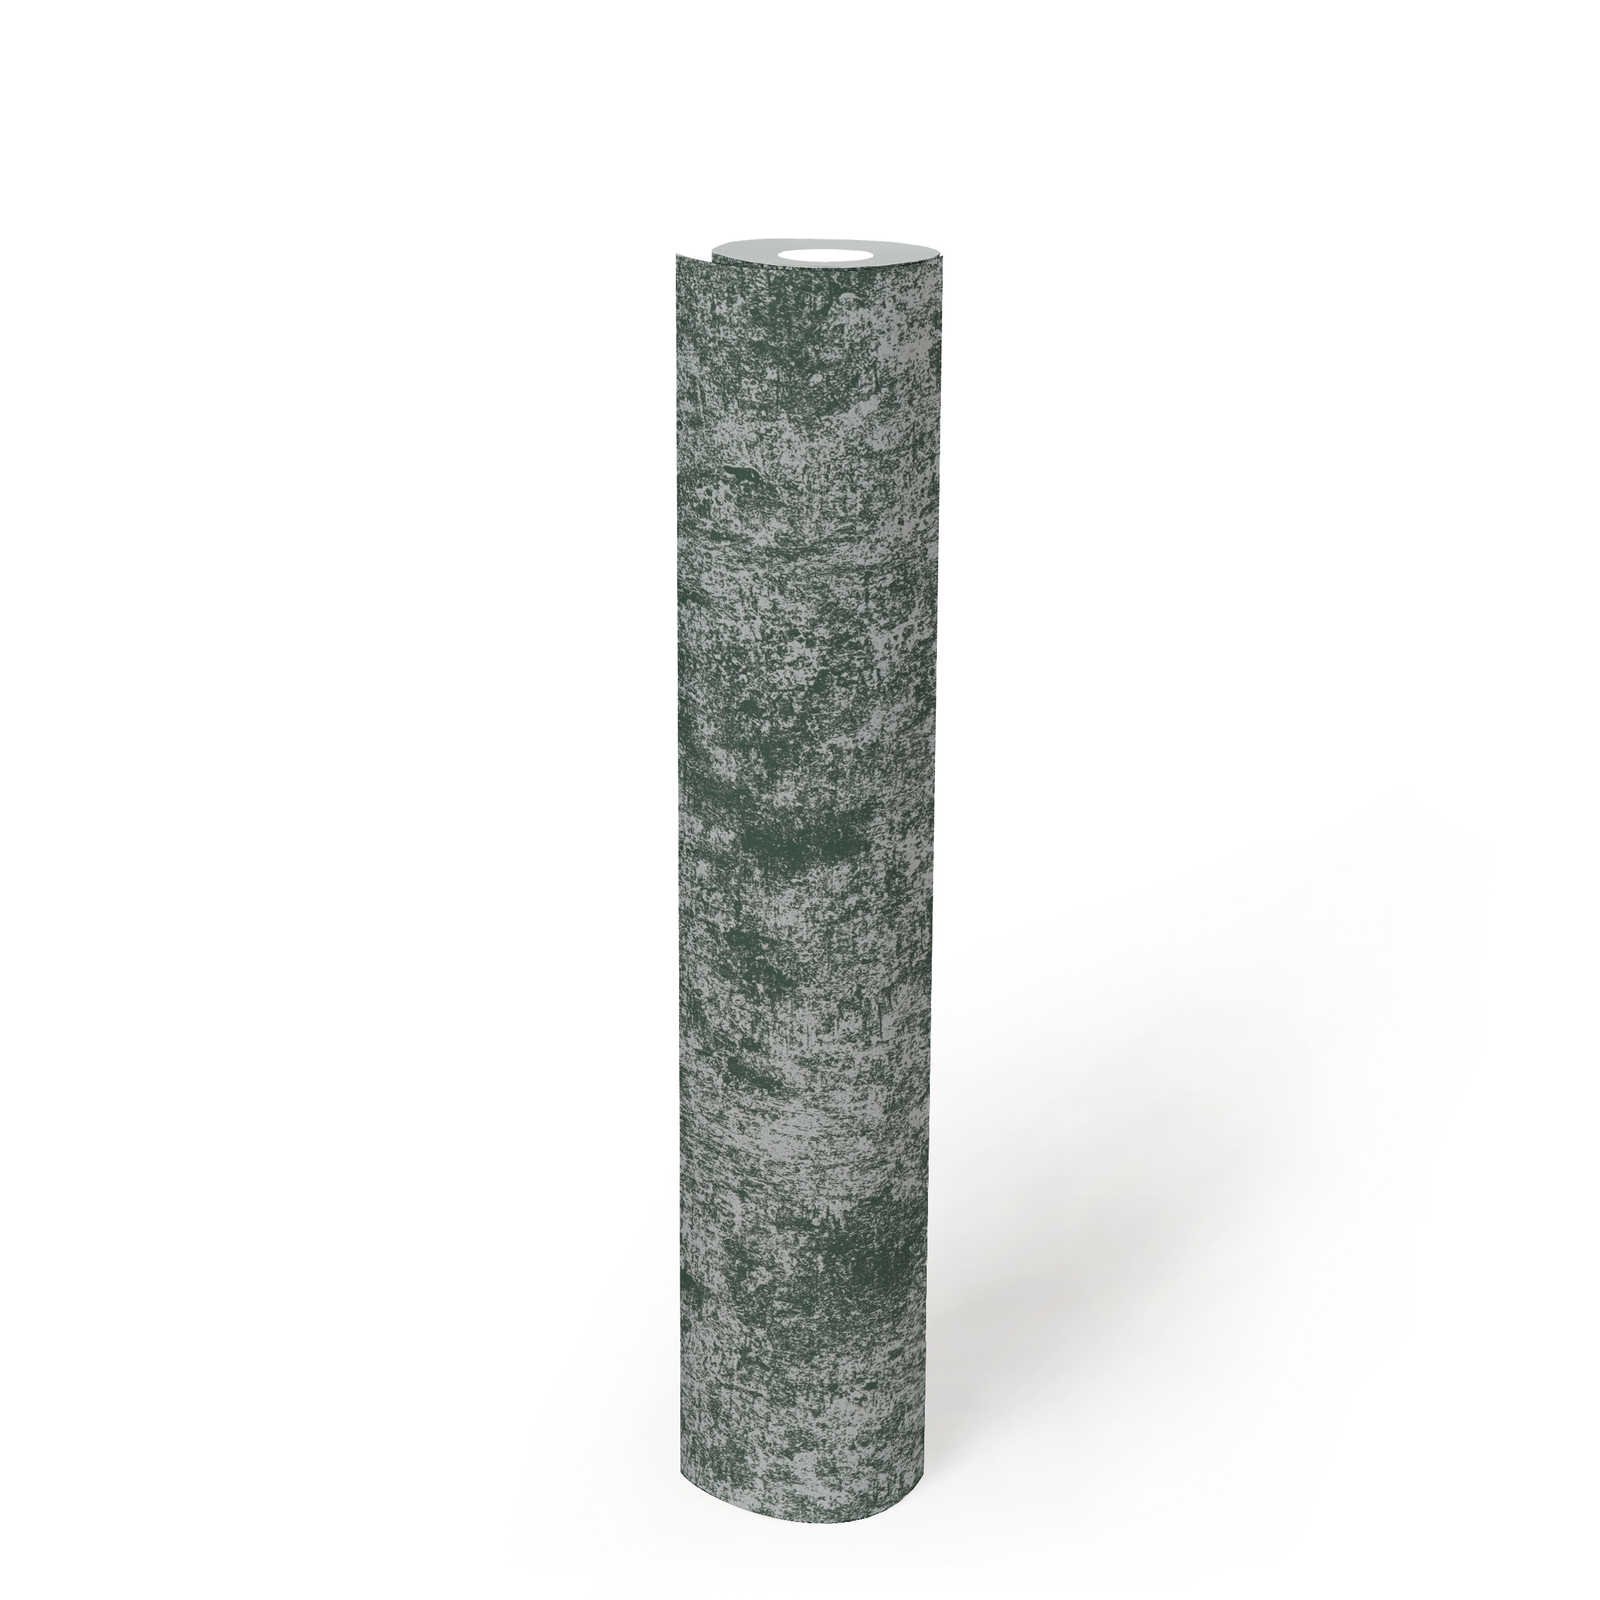             Metal effect wallpaper with glossy effect smooth - green, silver
        